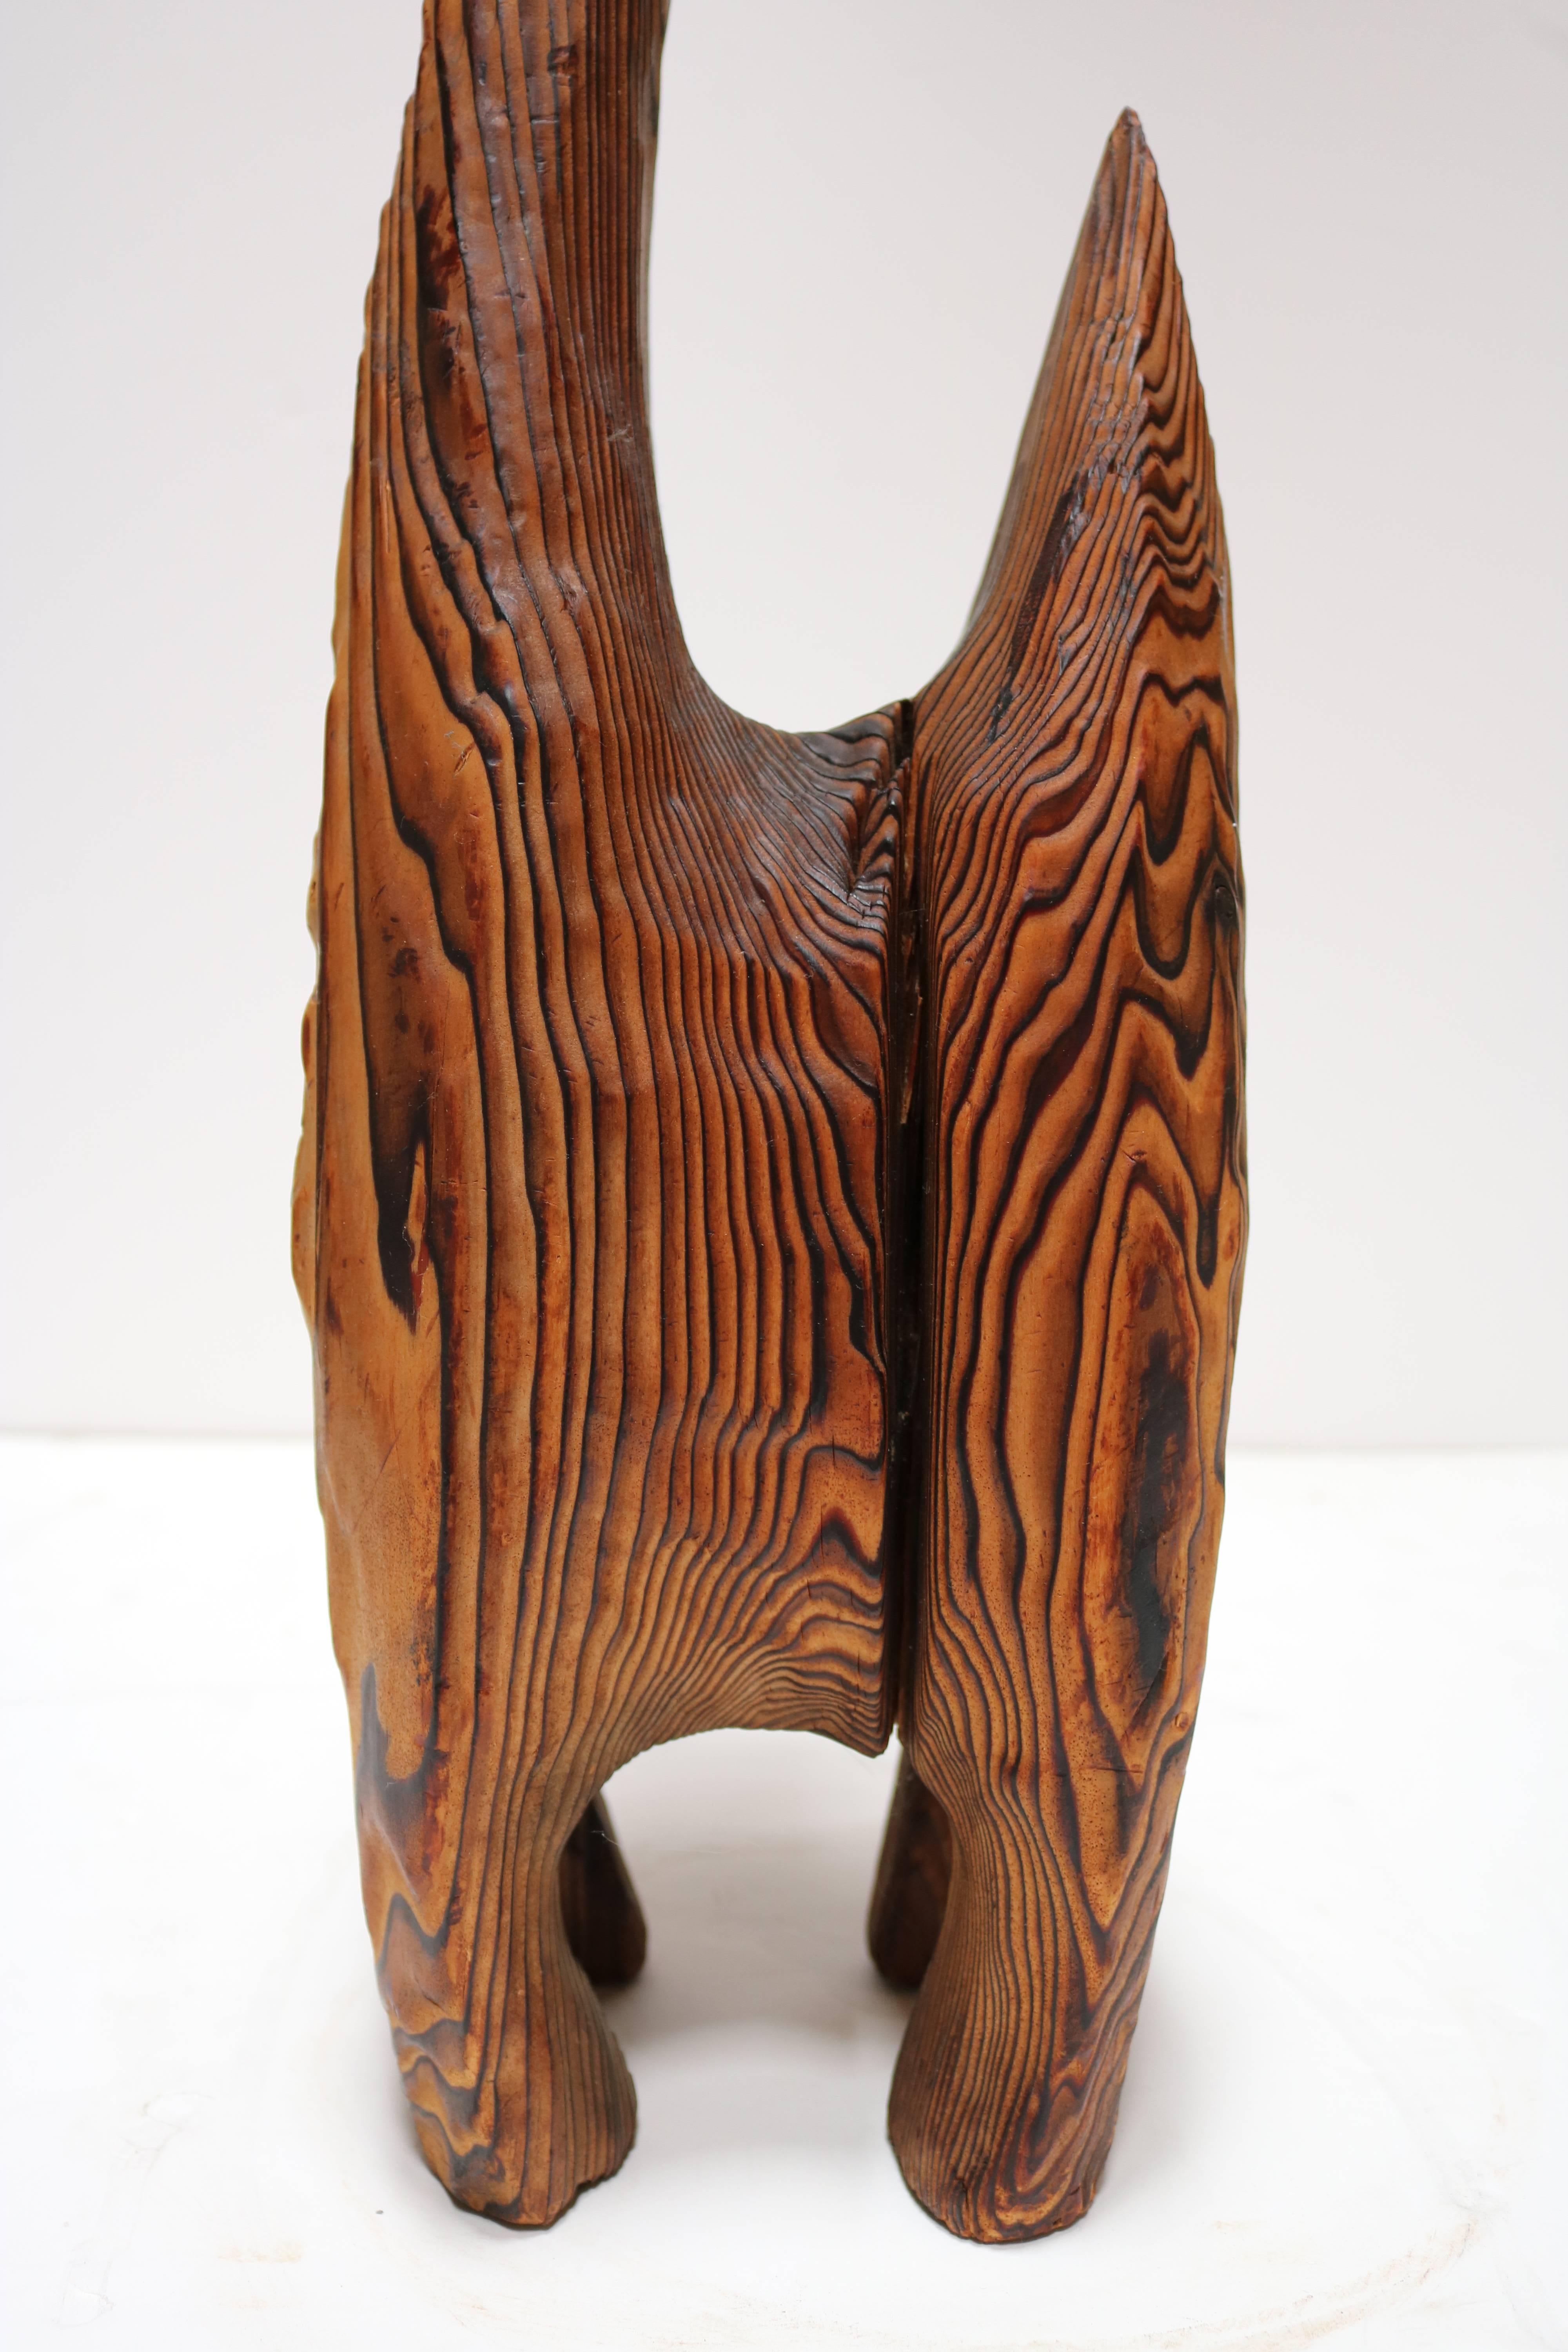 Mid-20th Century Striking Bocote Wood Sculpture of a Cat with Blue Eyes